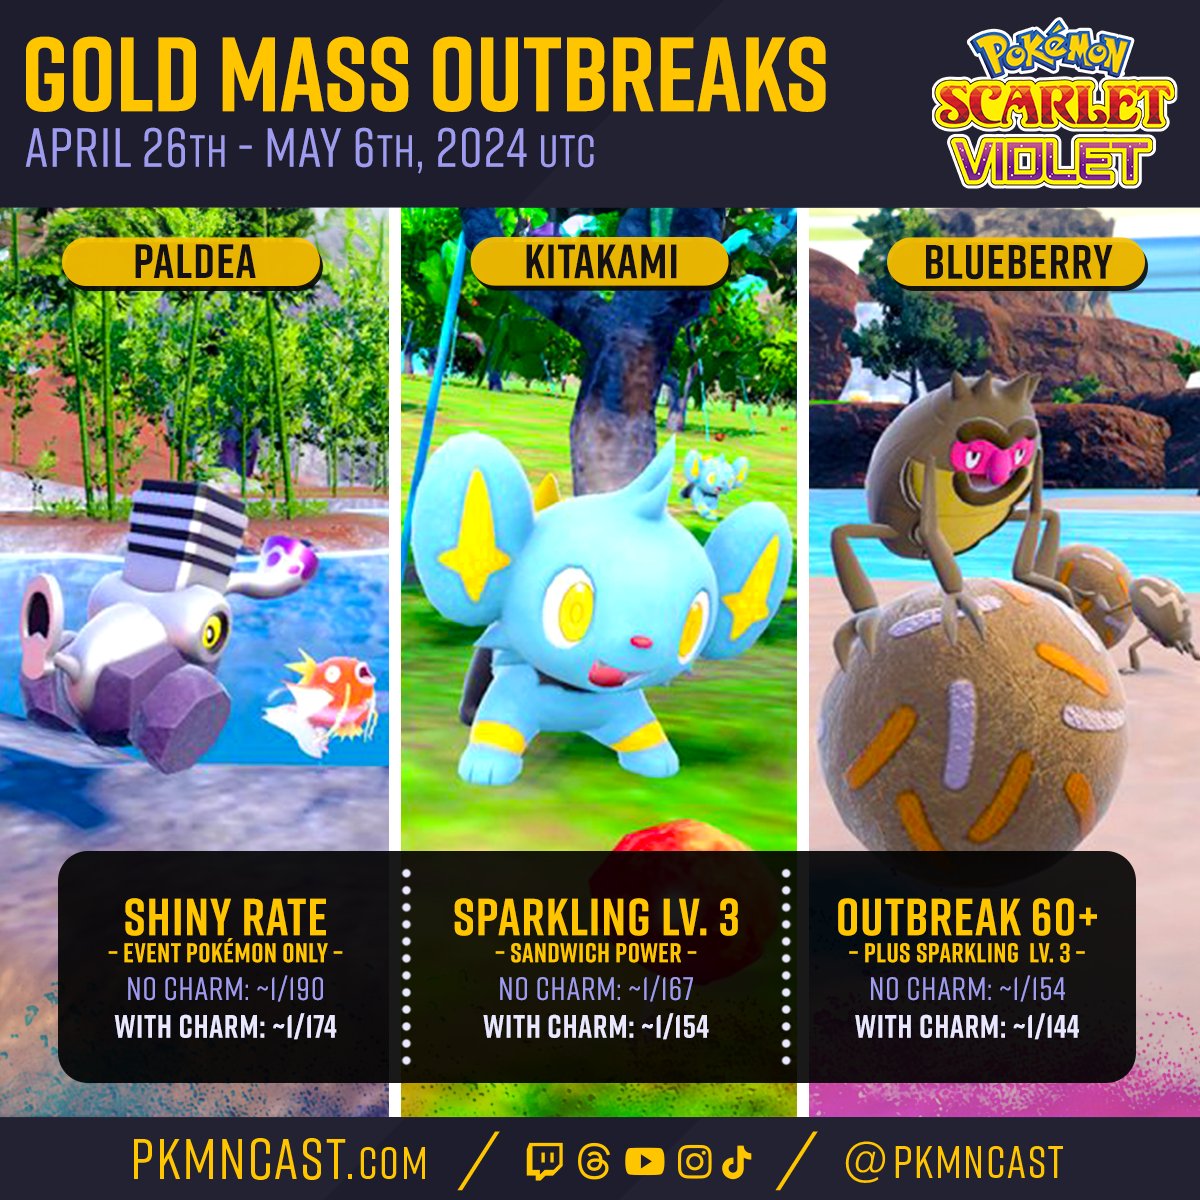 The new Mass Outbreaks are now live! The following Pokémon will have a greater chance to be Shiny in #PokemonScarletViolet   

• Magikarp & Varoom in Paldea 
• Shinx in Kitakami  
• Rellor in Blueberry